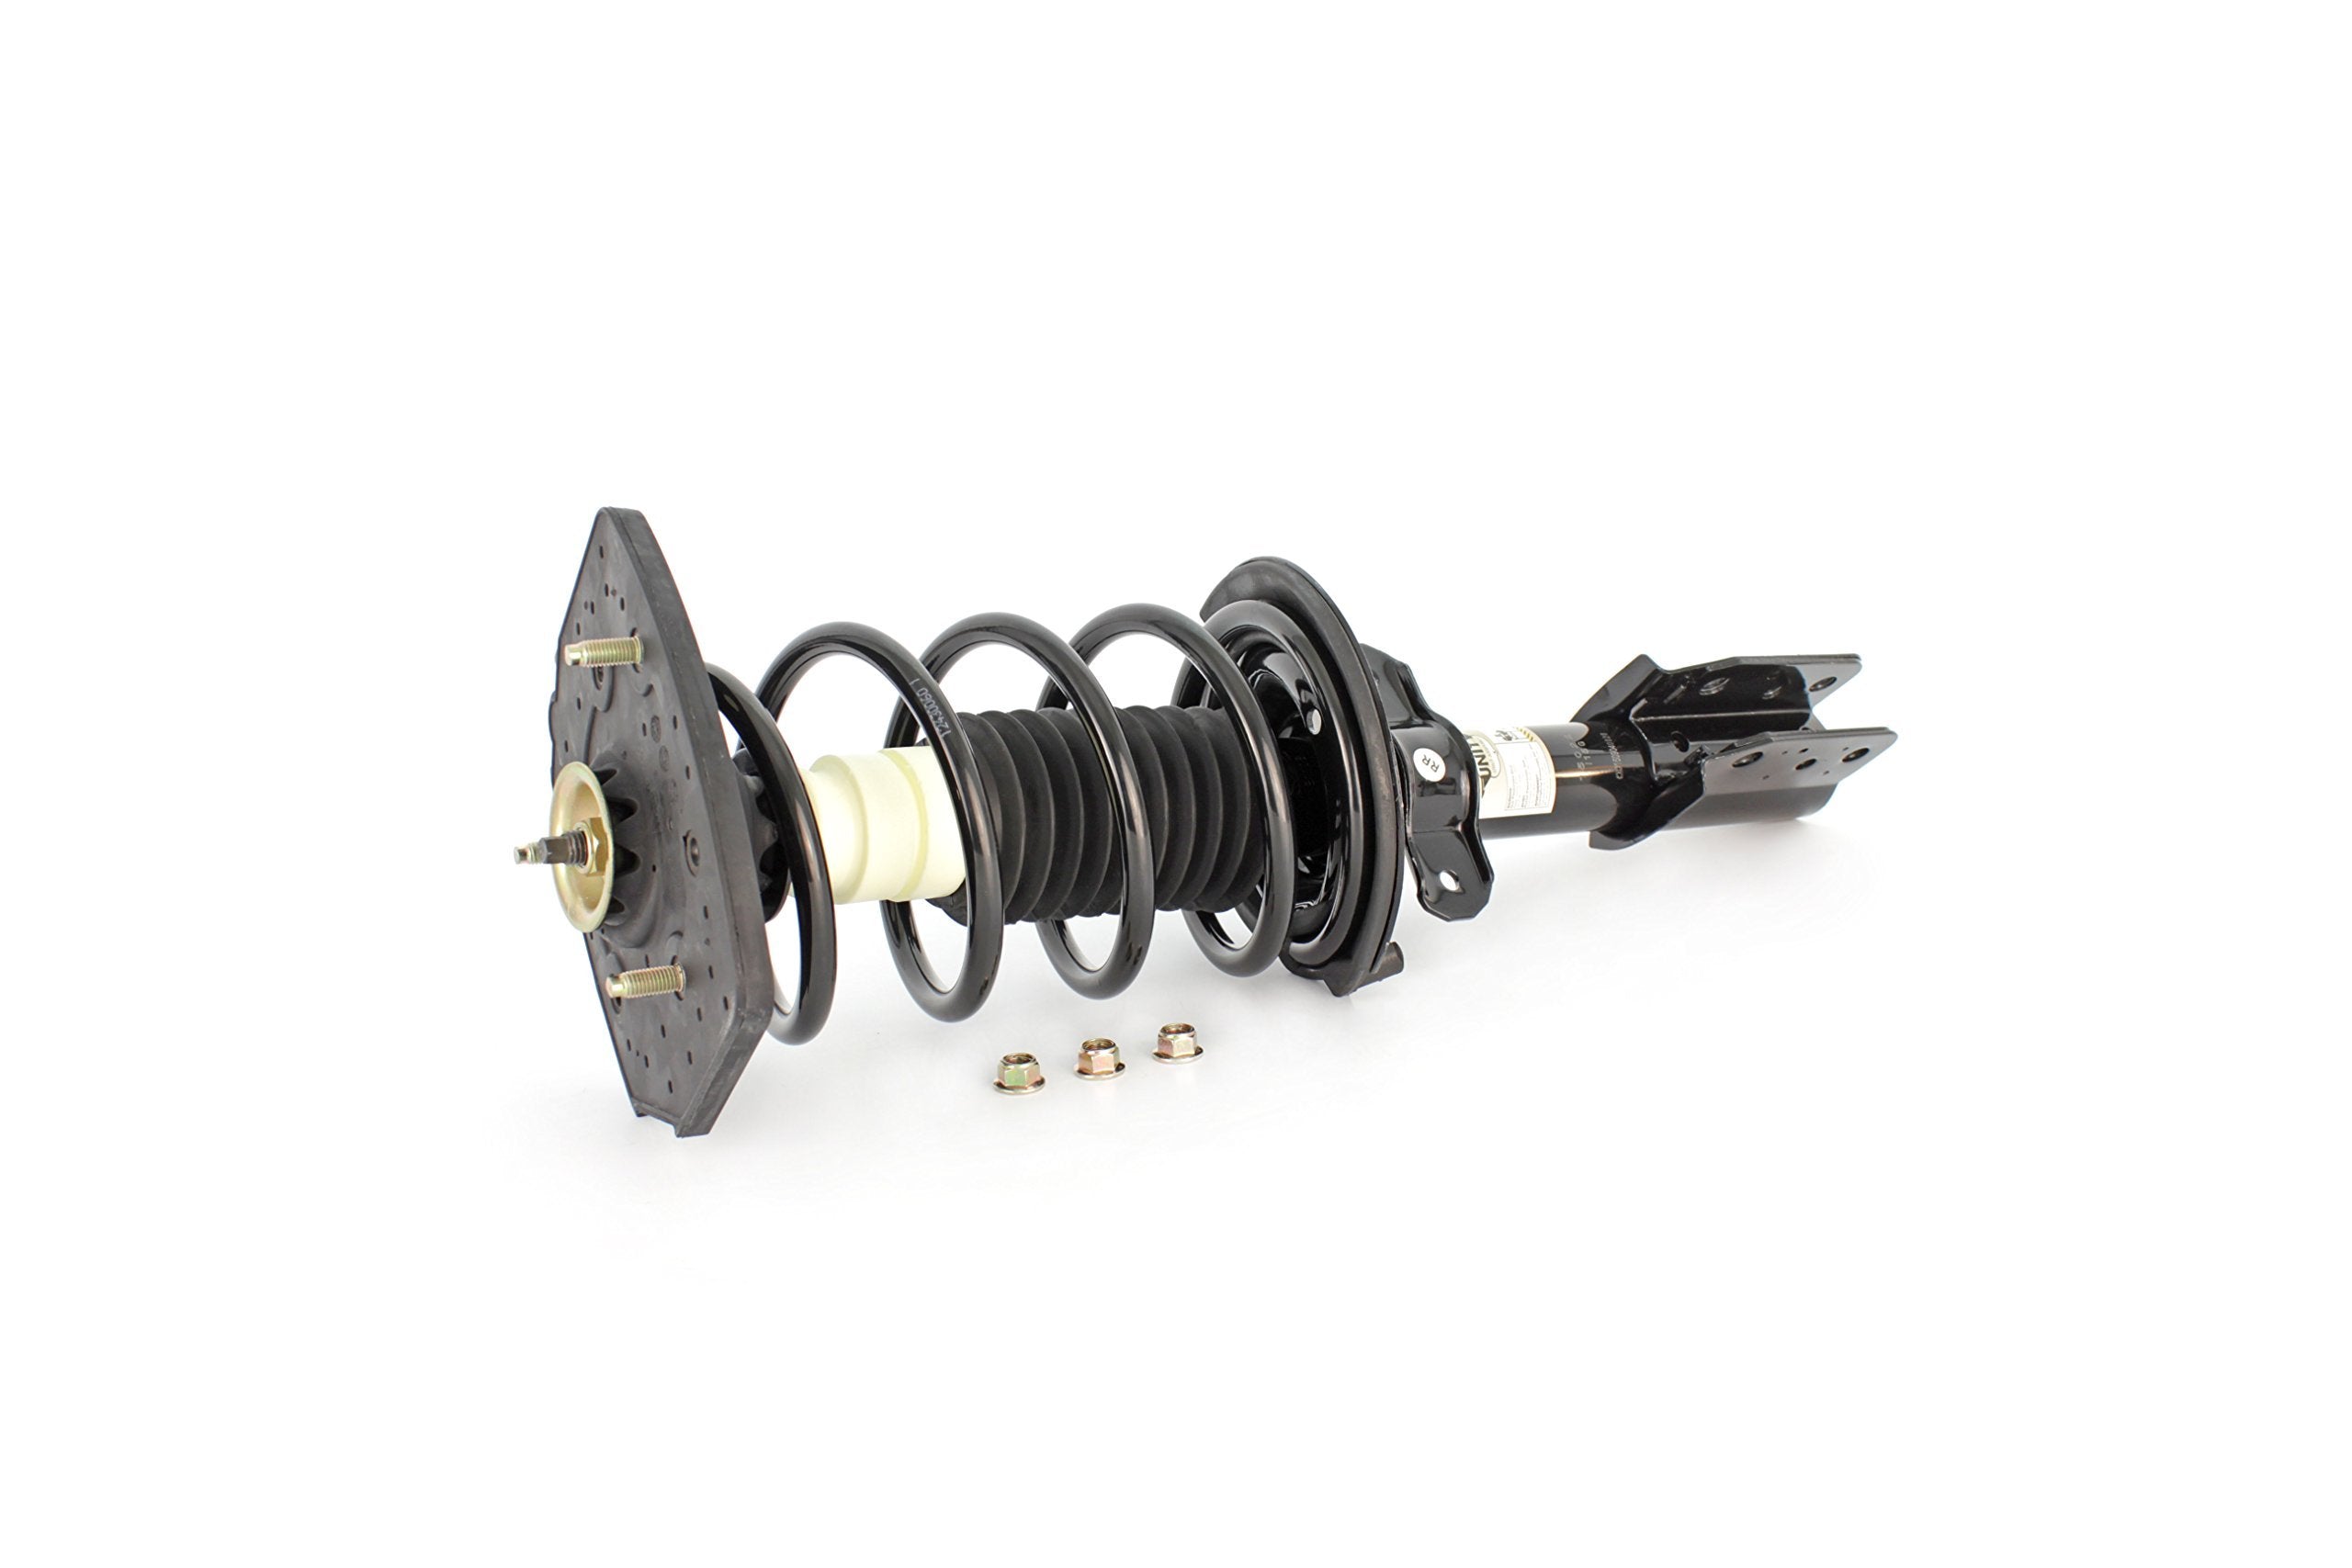 Unity 15022 Rear Right Complete Strut Assembly - Product Is Brand New - Retail Packaging Maybe Opened Or Damaged - Open Box